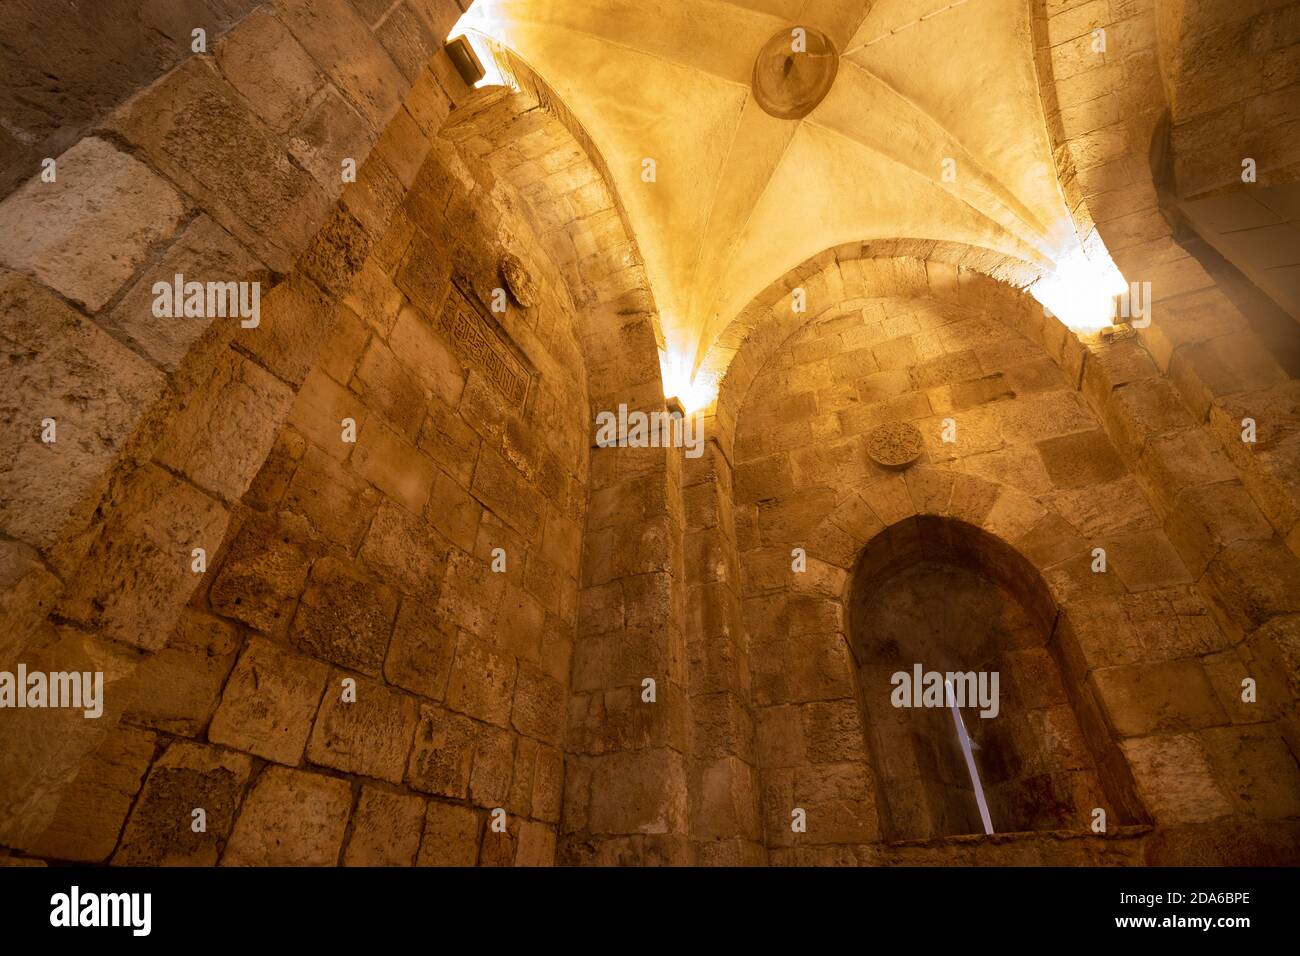 Jaffa Gate in the walls of the Old City of Jerusalem at night, looking out the window inside the gate Stock Photo